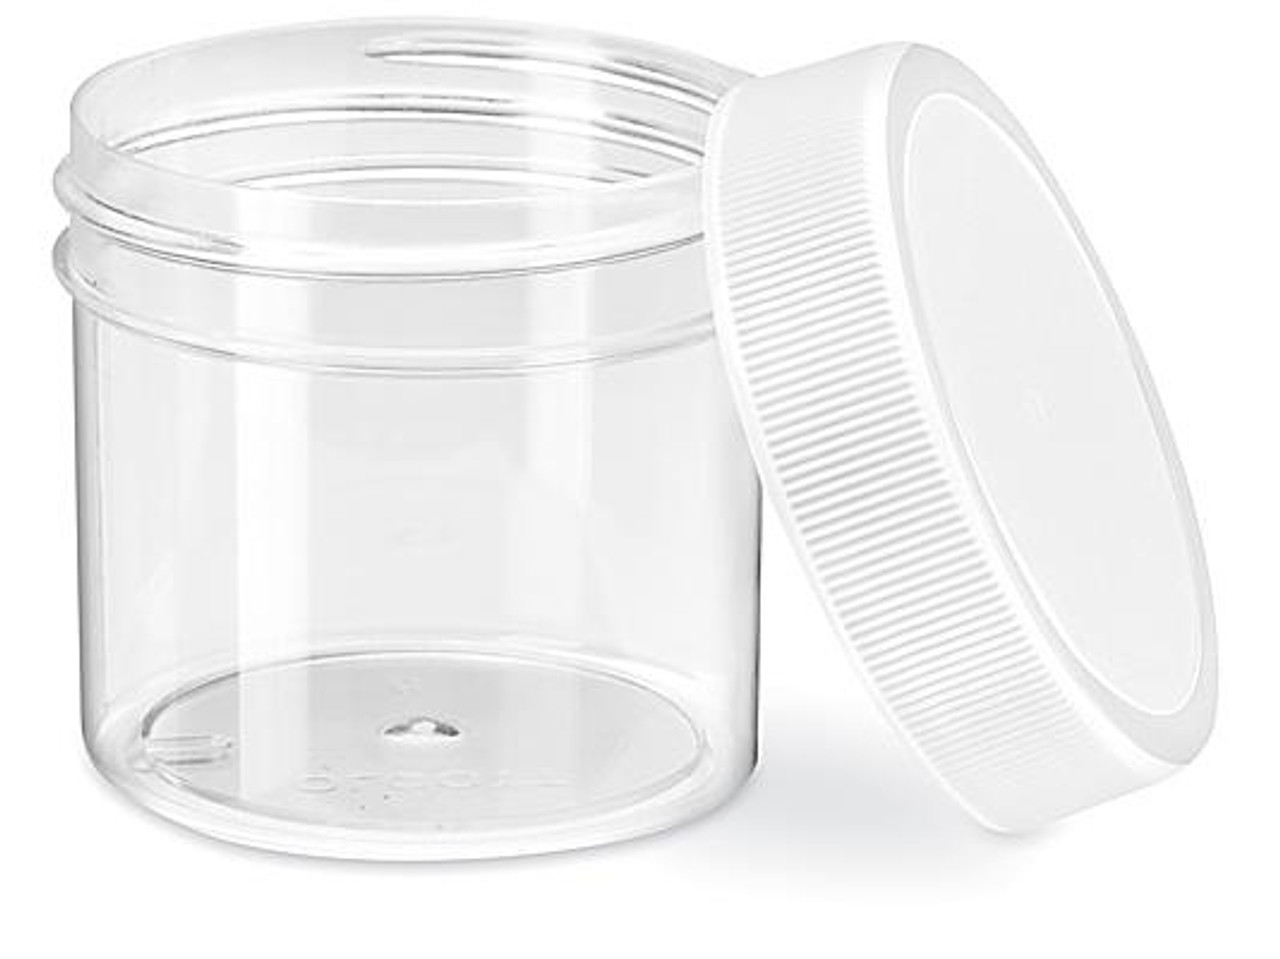 STORAGE Jar CONTAINERS Clear Polystyrene Wide Mouth Containers